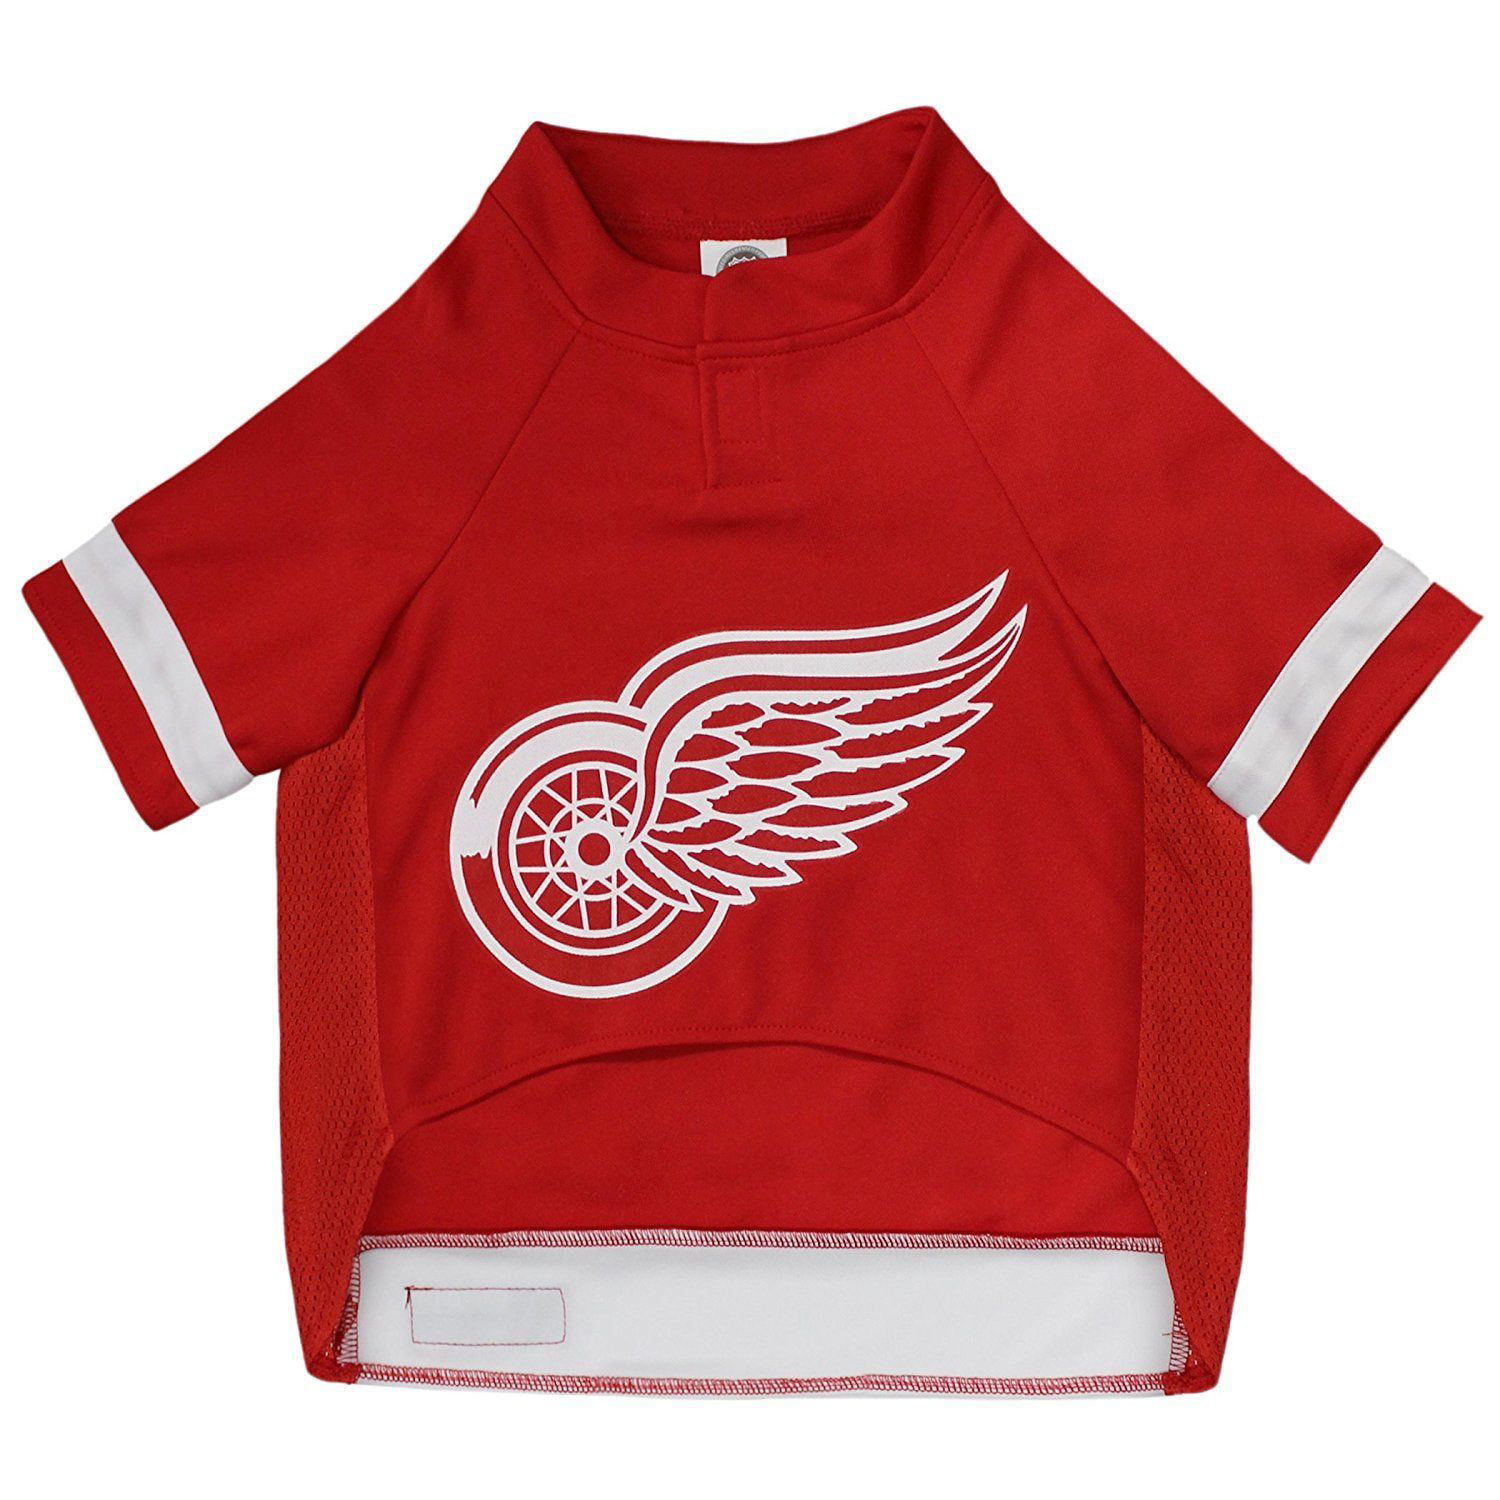 Pets First NHL Detroit Red Wings T-Shirt - Licensed, Wrinkle-free,  stretchable Tee Shirt for Dogs & Cats 